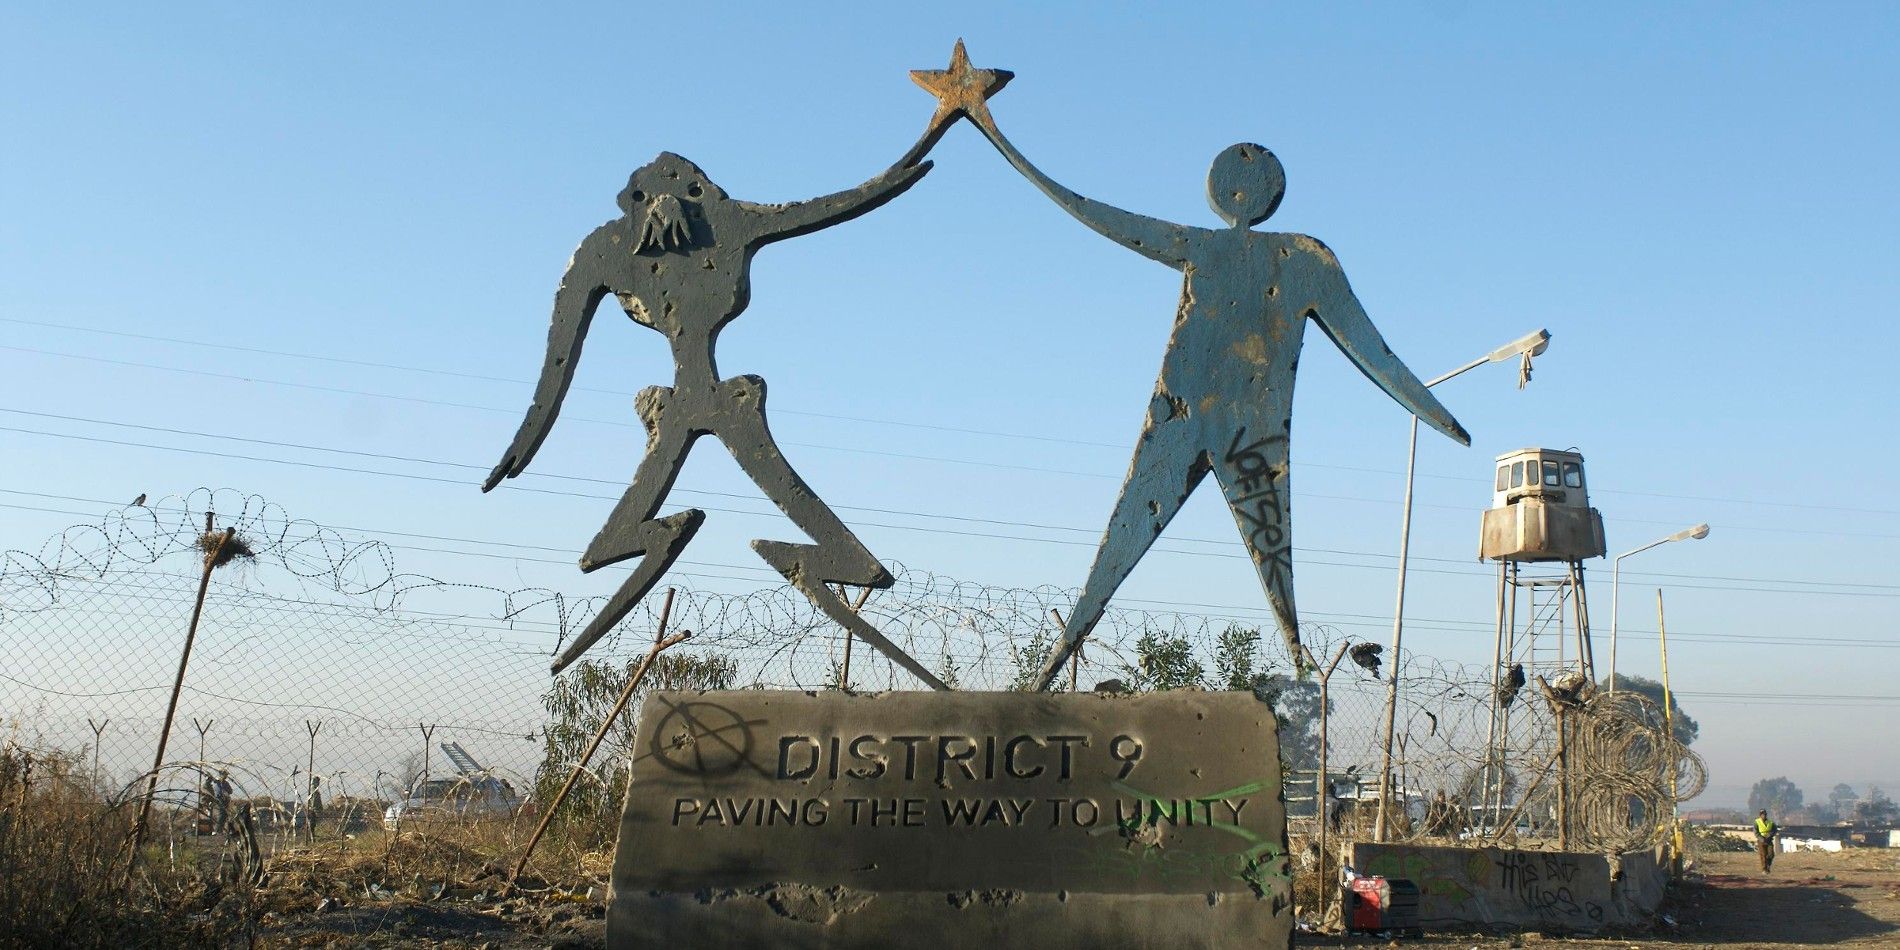 District 9 sign